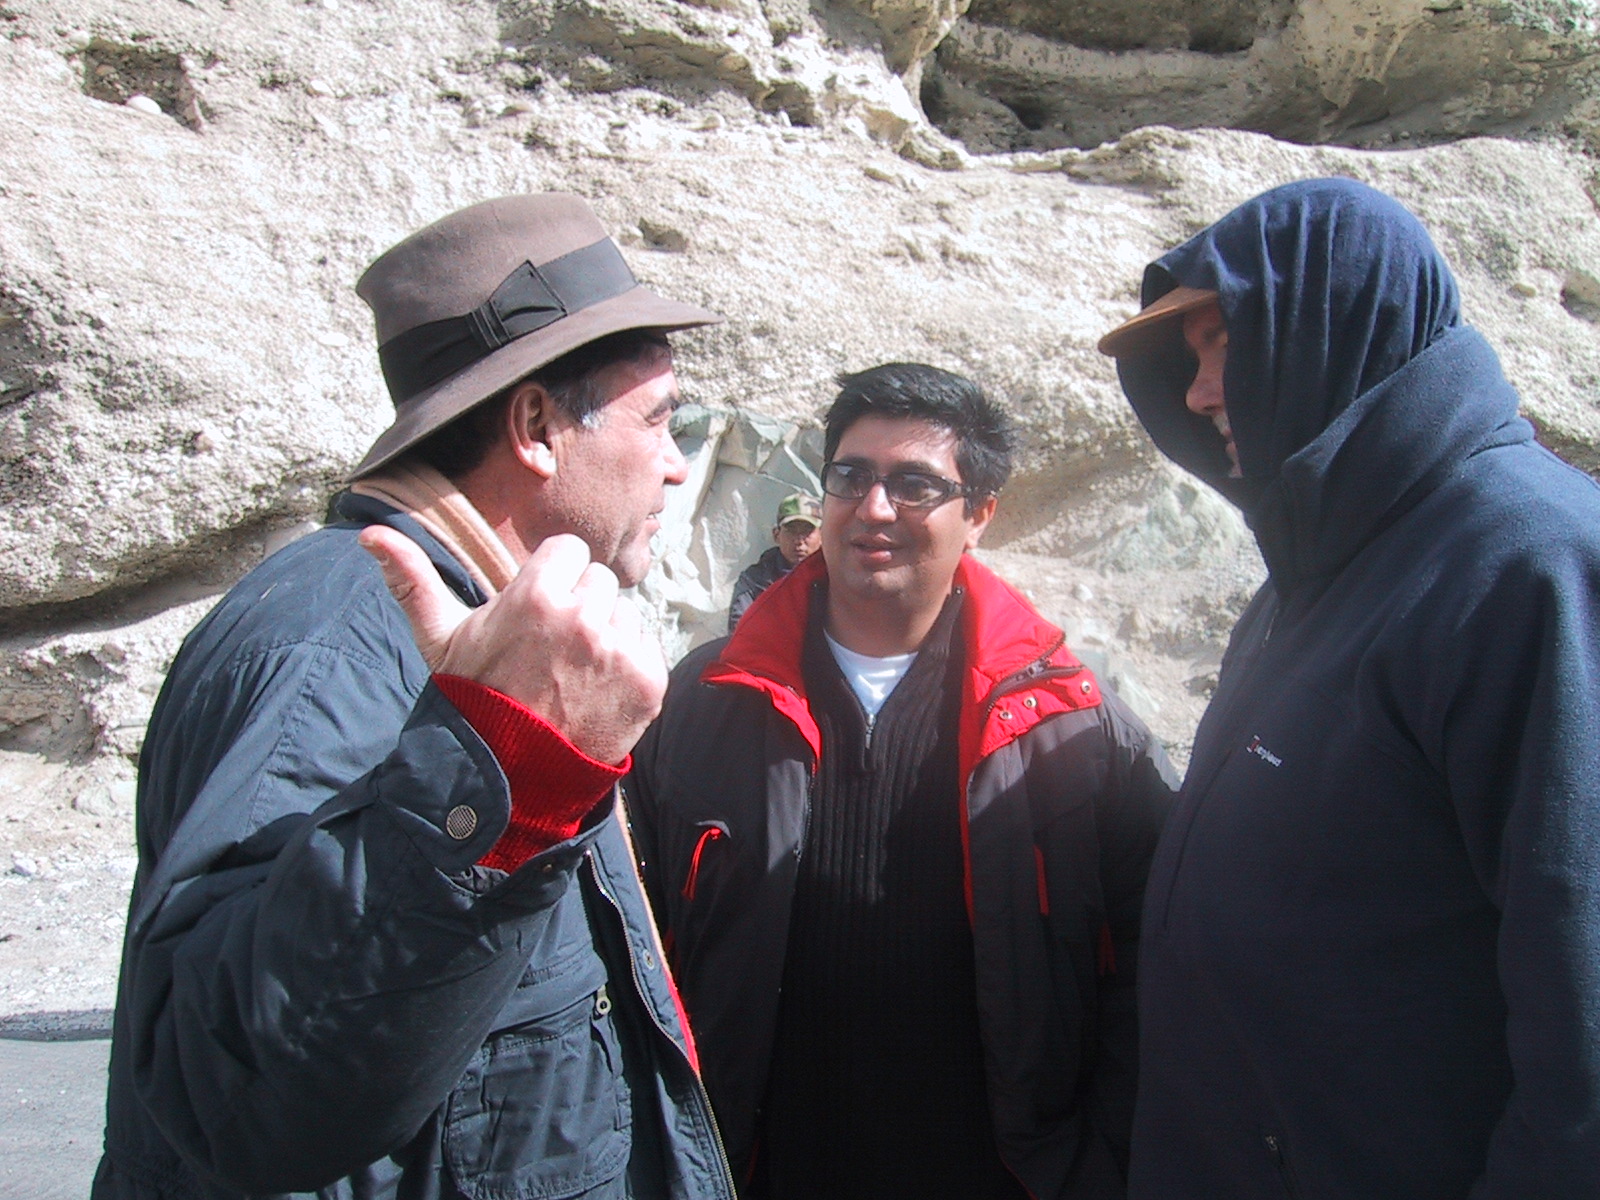 Tabrez with Oliver Stone (L) and Iain Smith (R) in Ladakh,shooting 